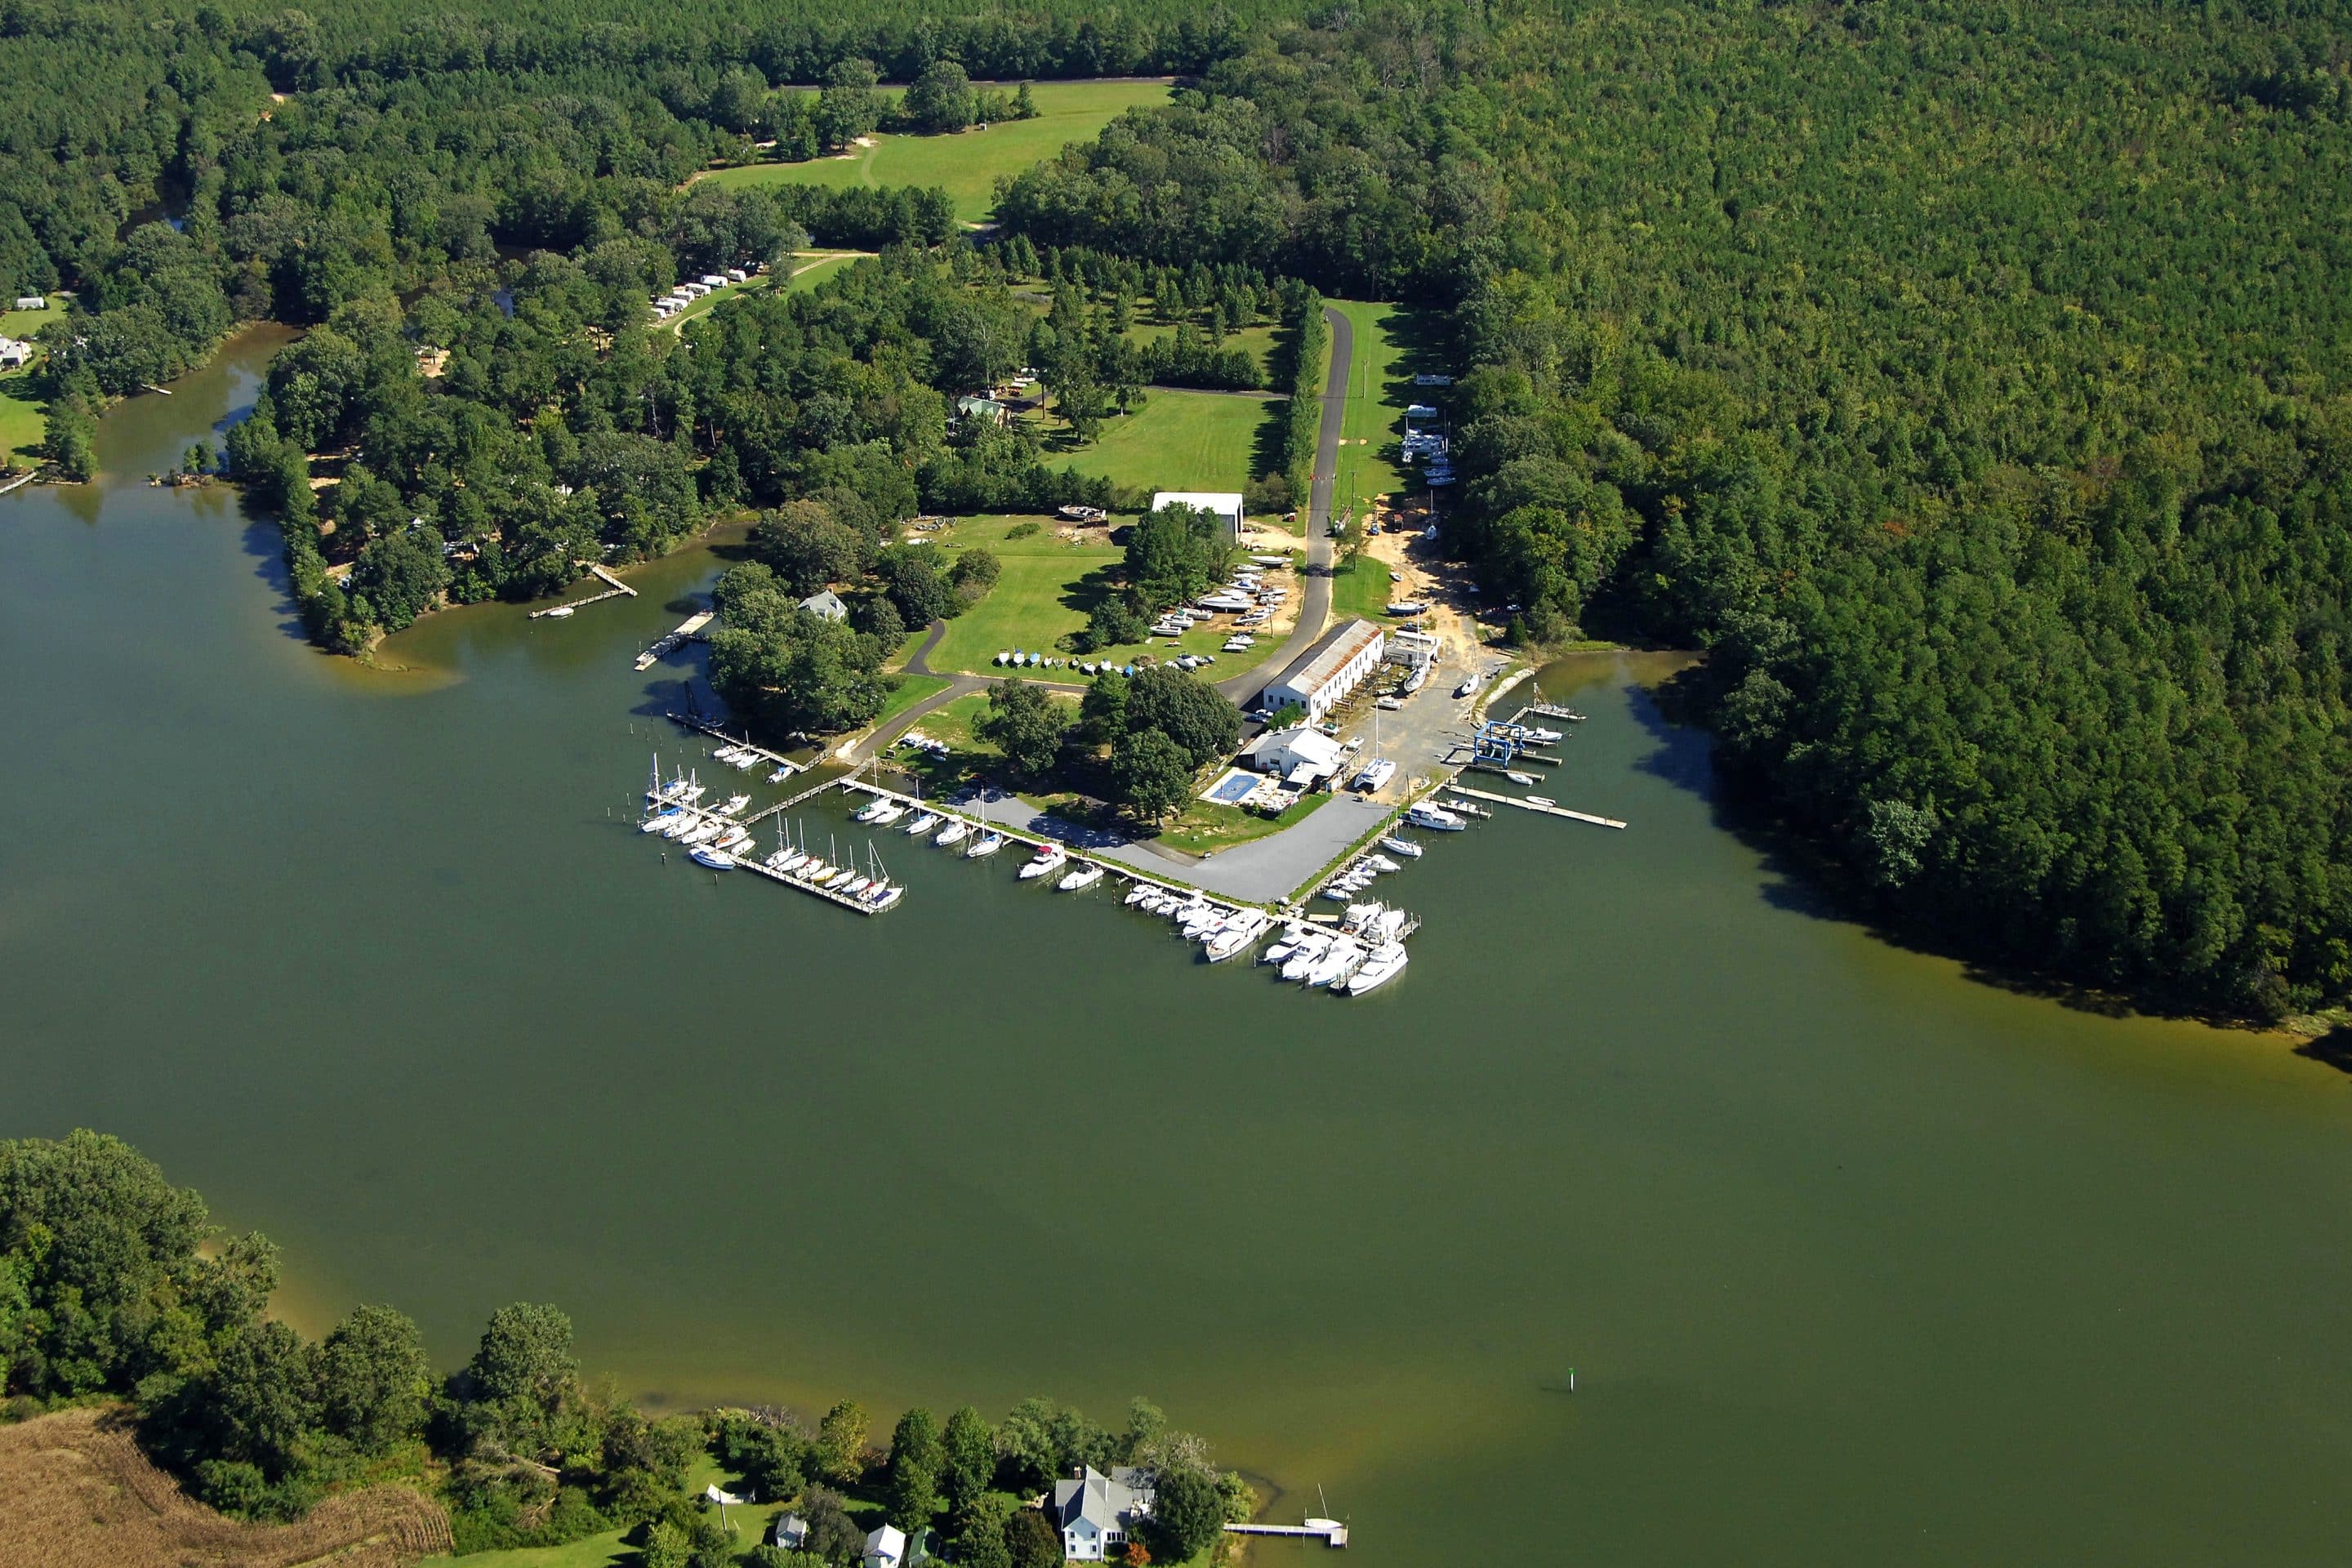 Dennis Point Marina and Campground in St. Mary’s County, Md.